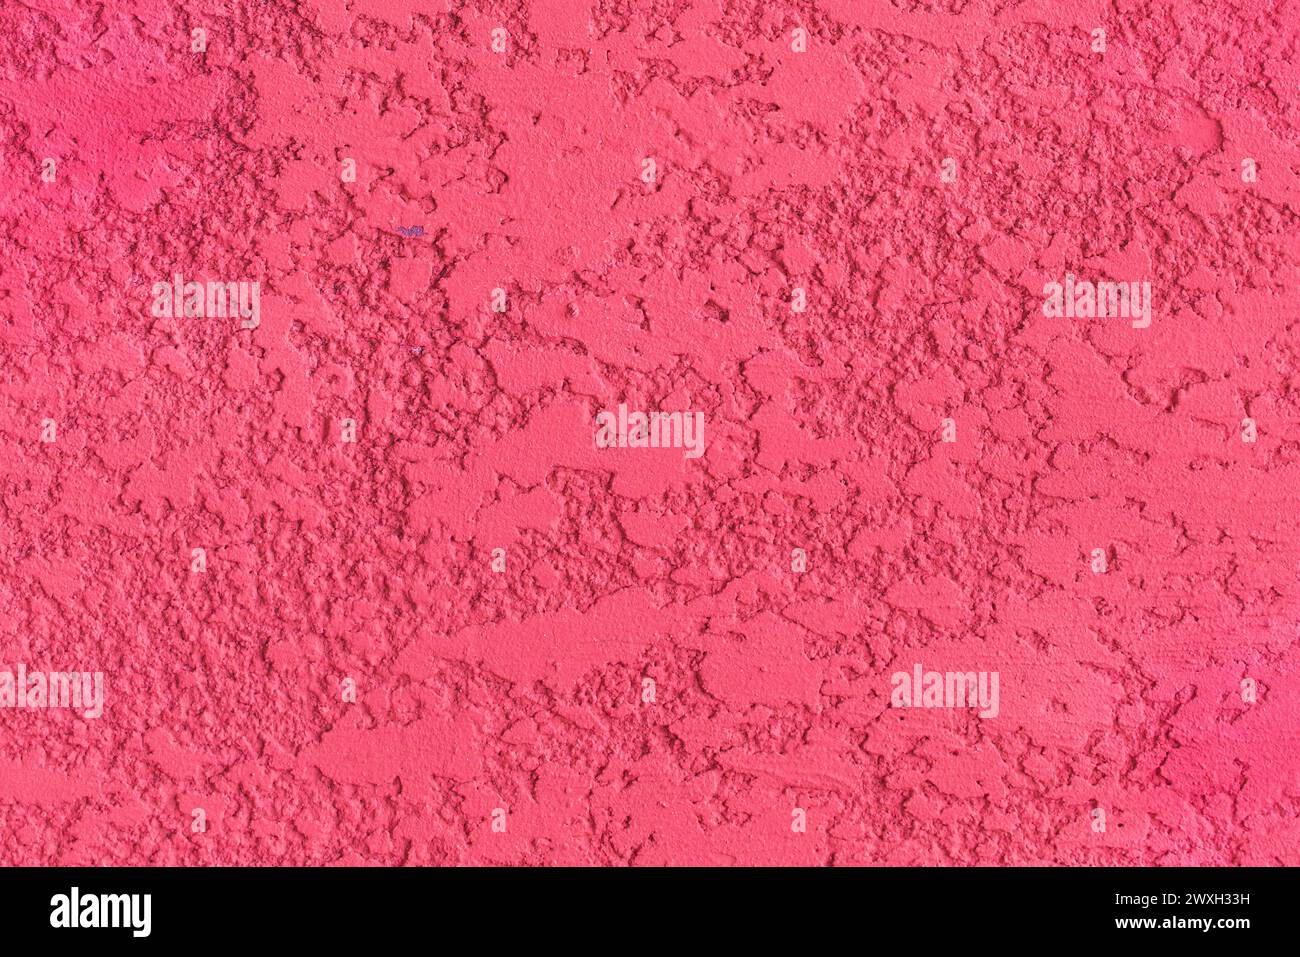 Pink paint texture plaster wall rough stucco background solid abstract pattern. Stock Photo